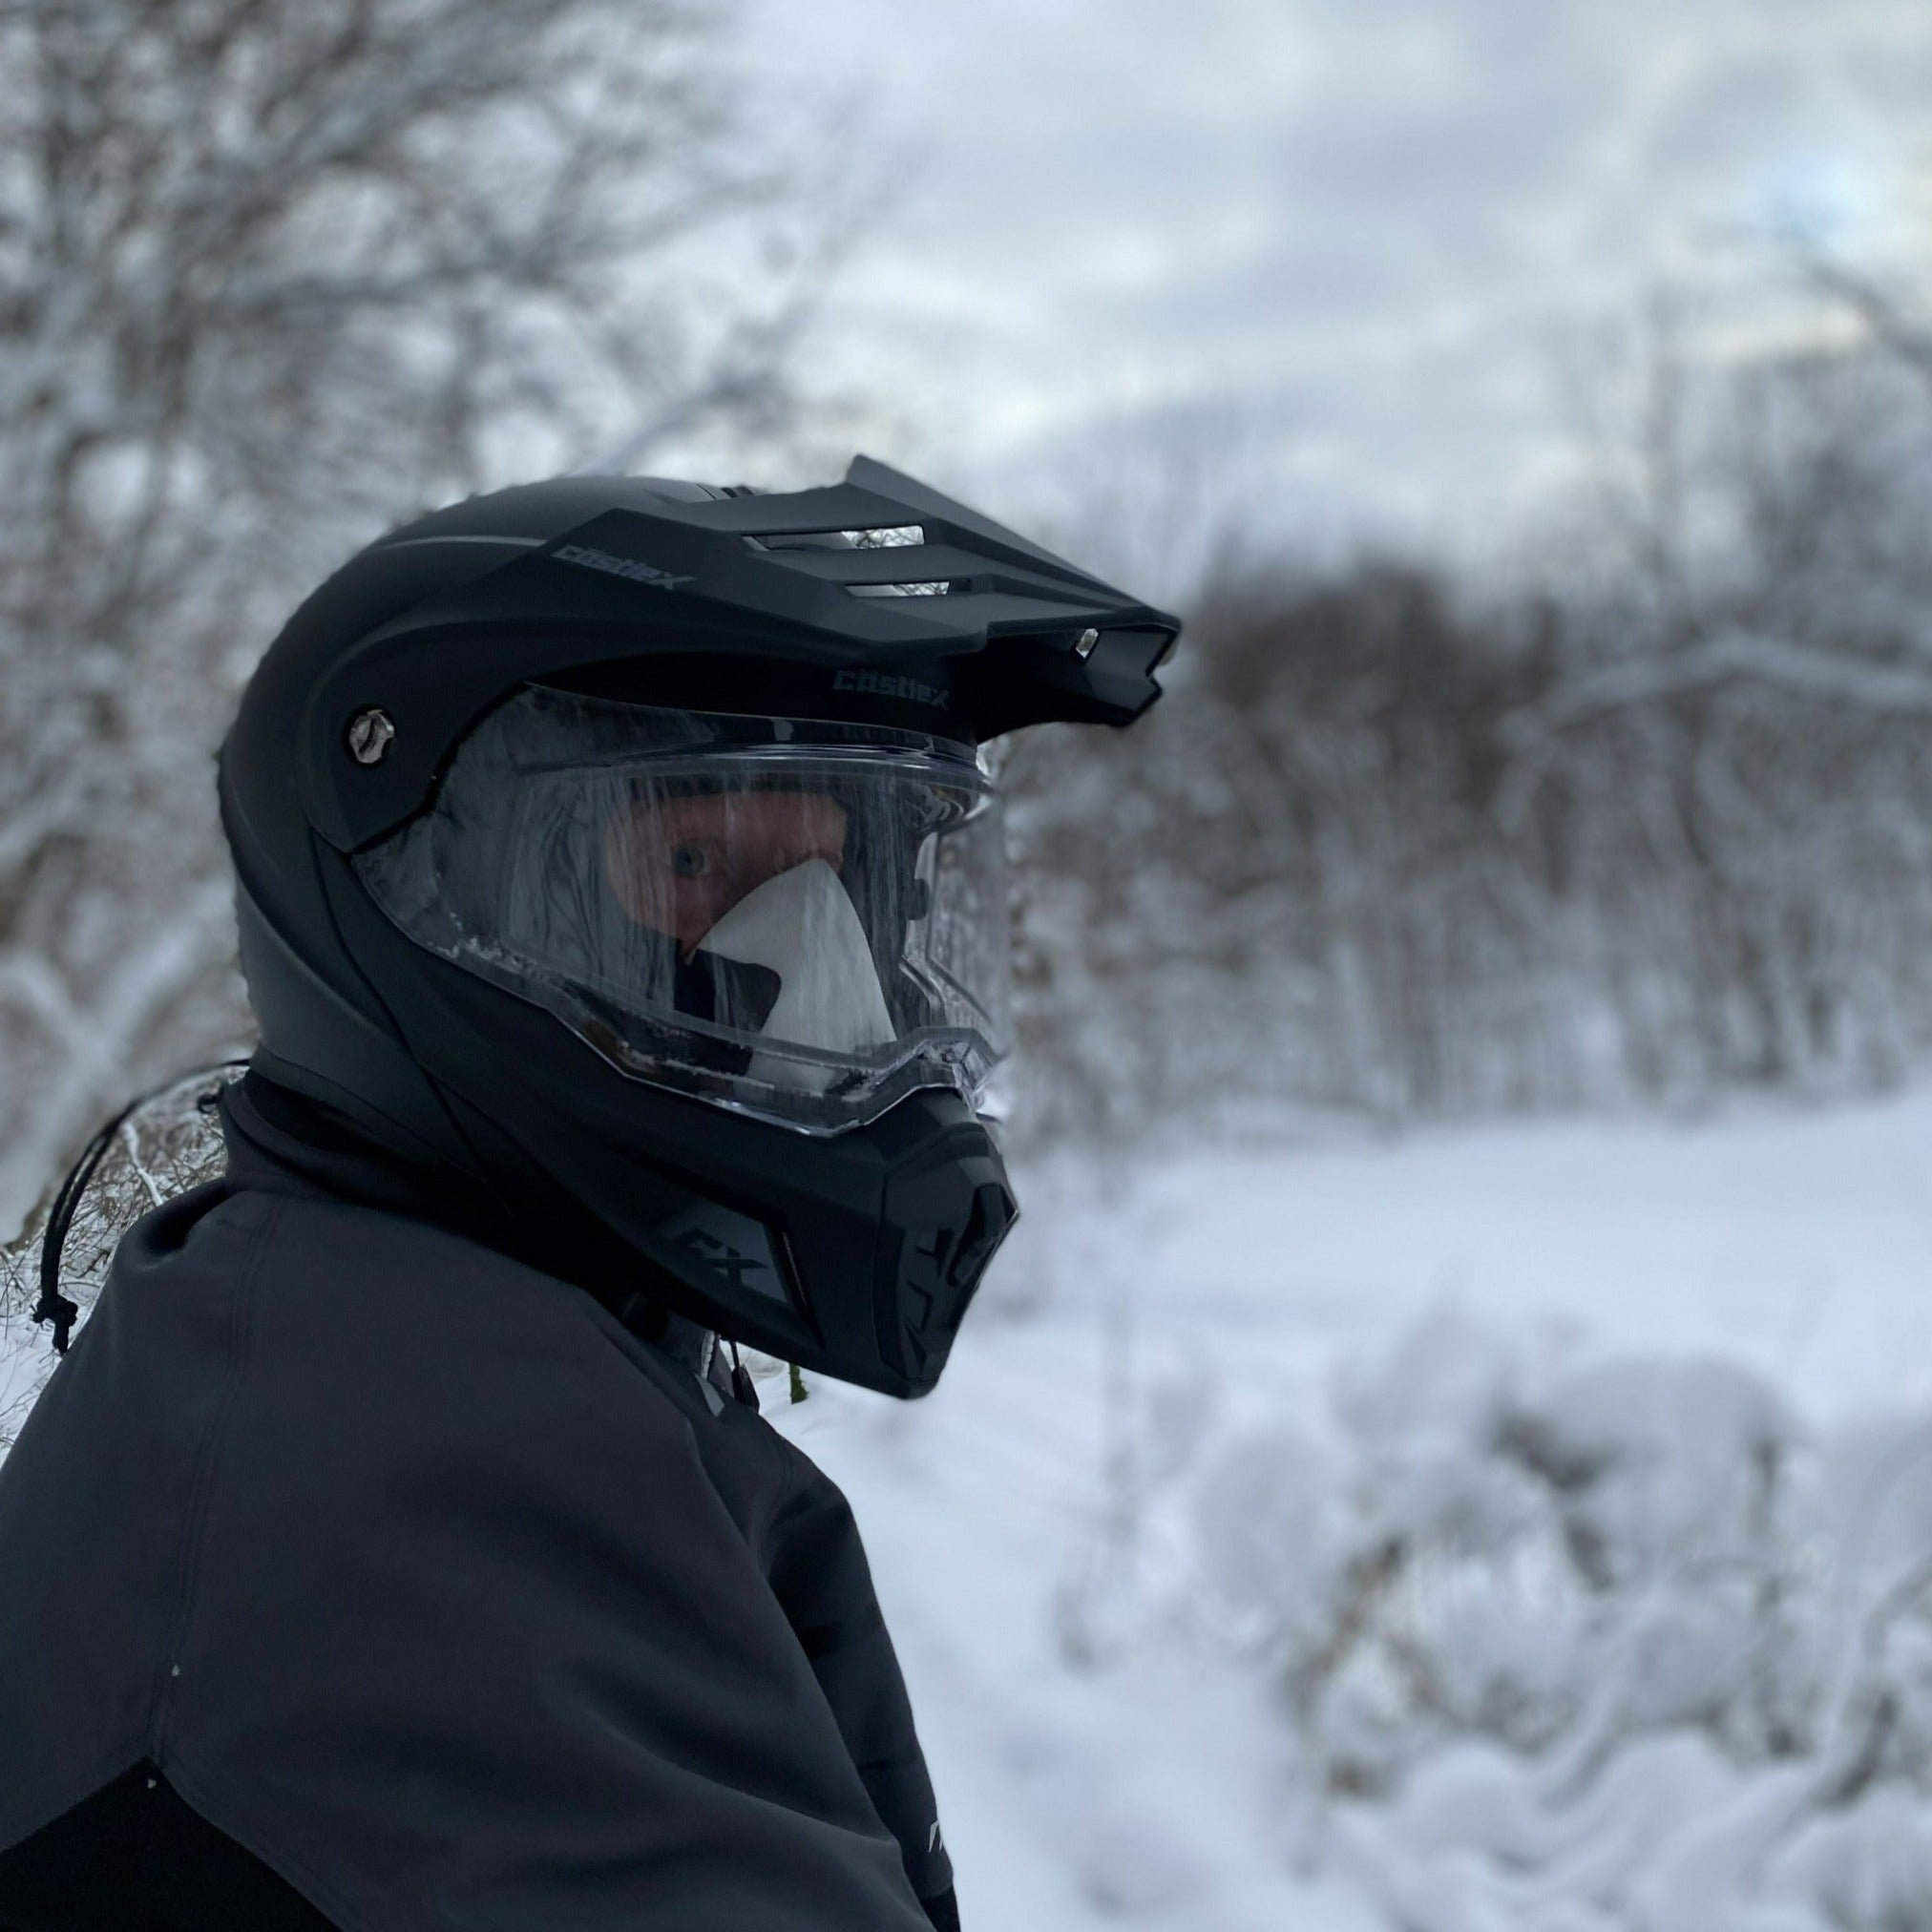 Man wearing a helmet while snowmobiling in a snowy wooded area with a SNOWFLOW balaclava on